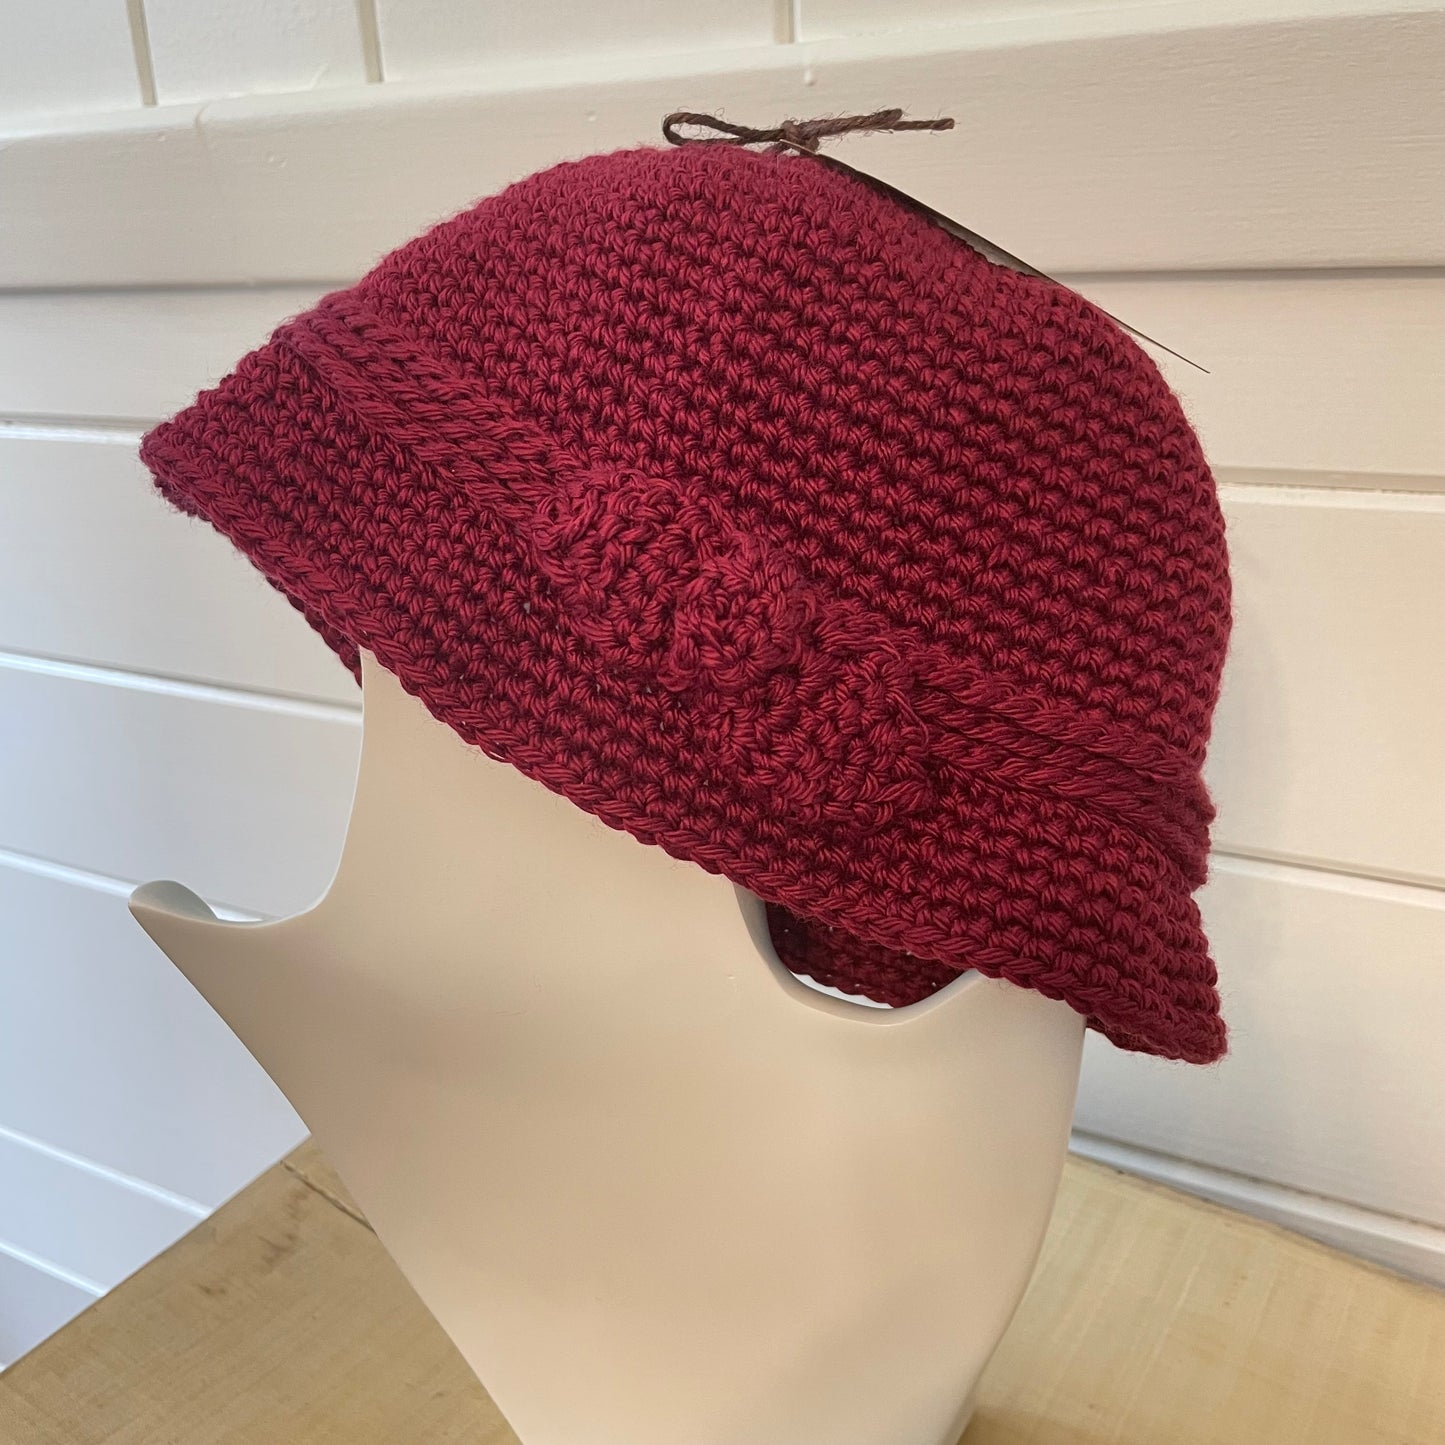 Vintage Retro Style Cloche Hat with Bow Accent in Red Wine Maroon Hand Crocheted Knit Fall Winter Bohemian Boho--shown with bow on left